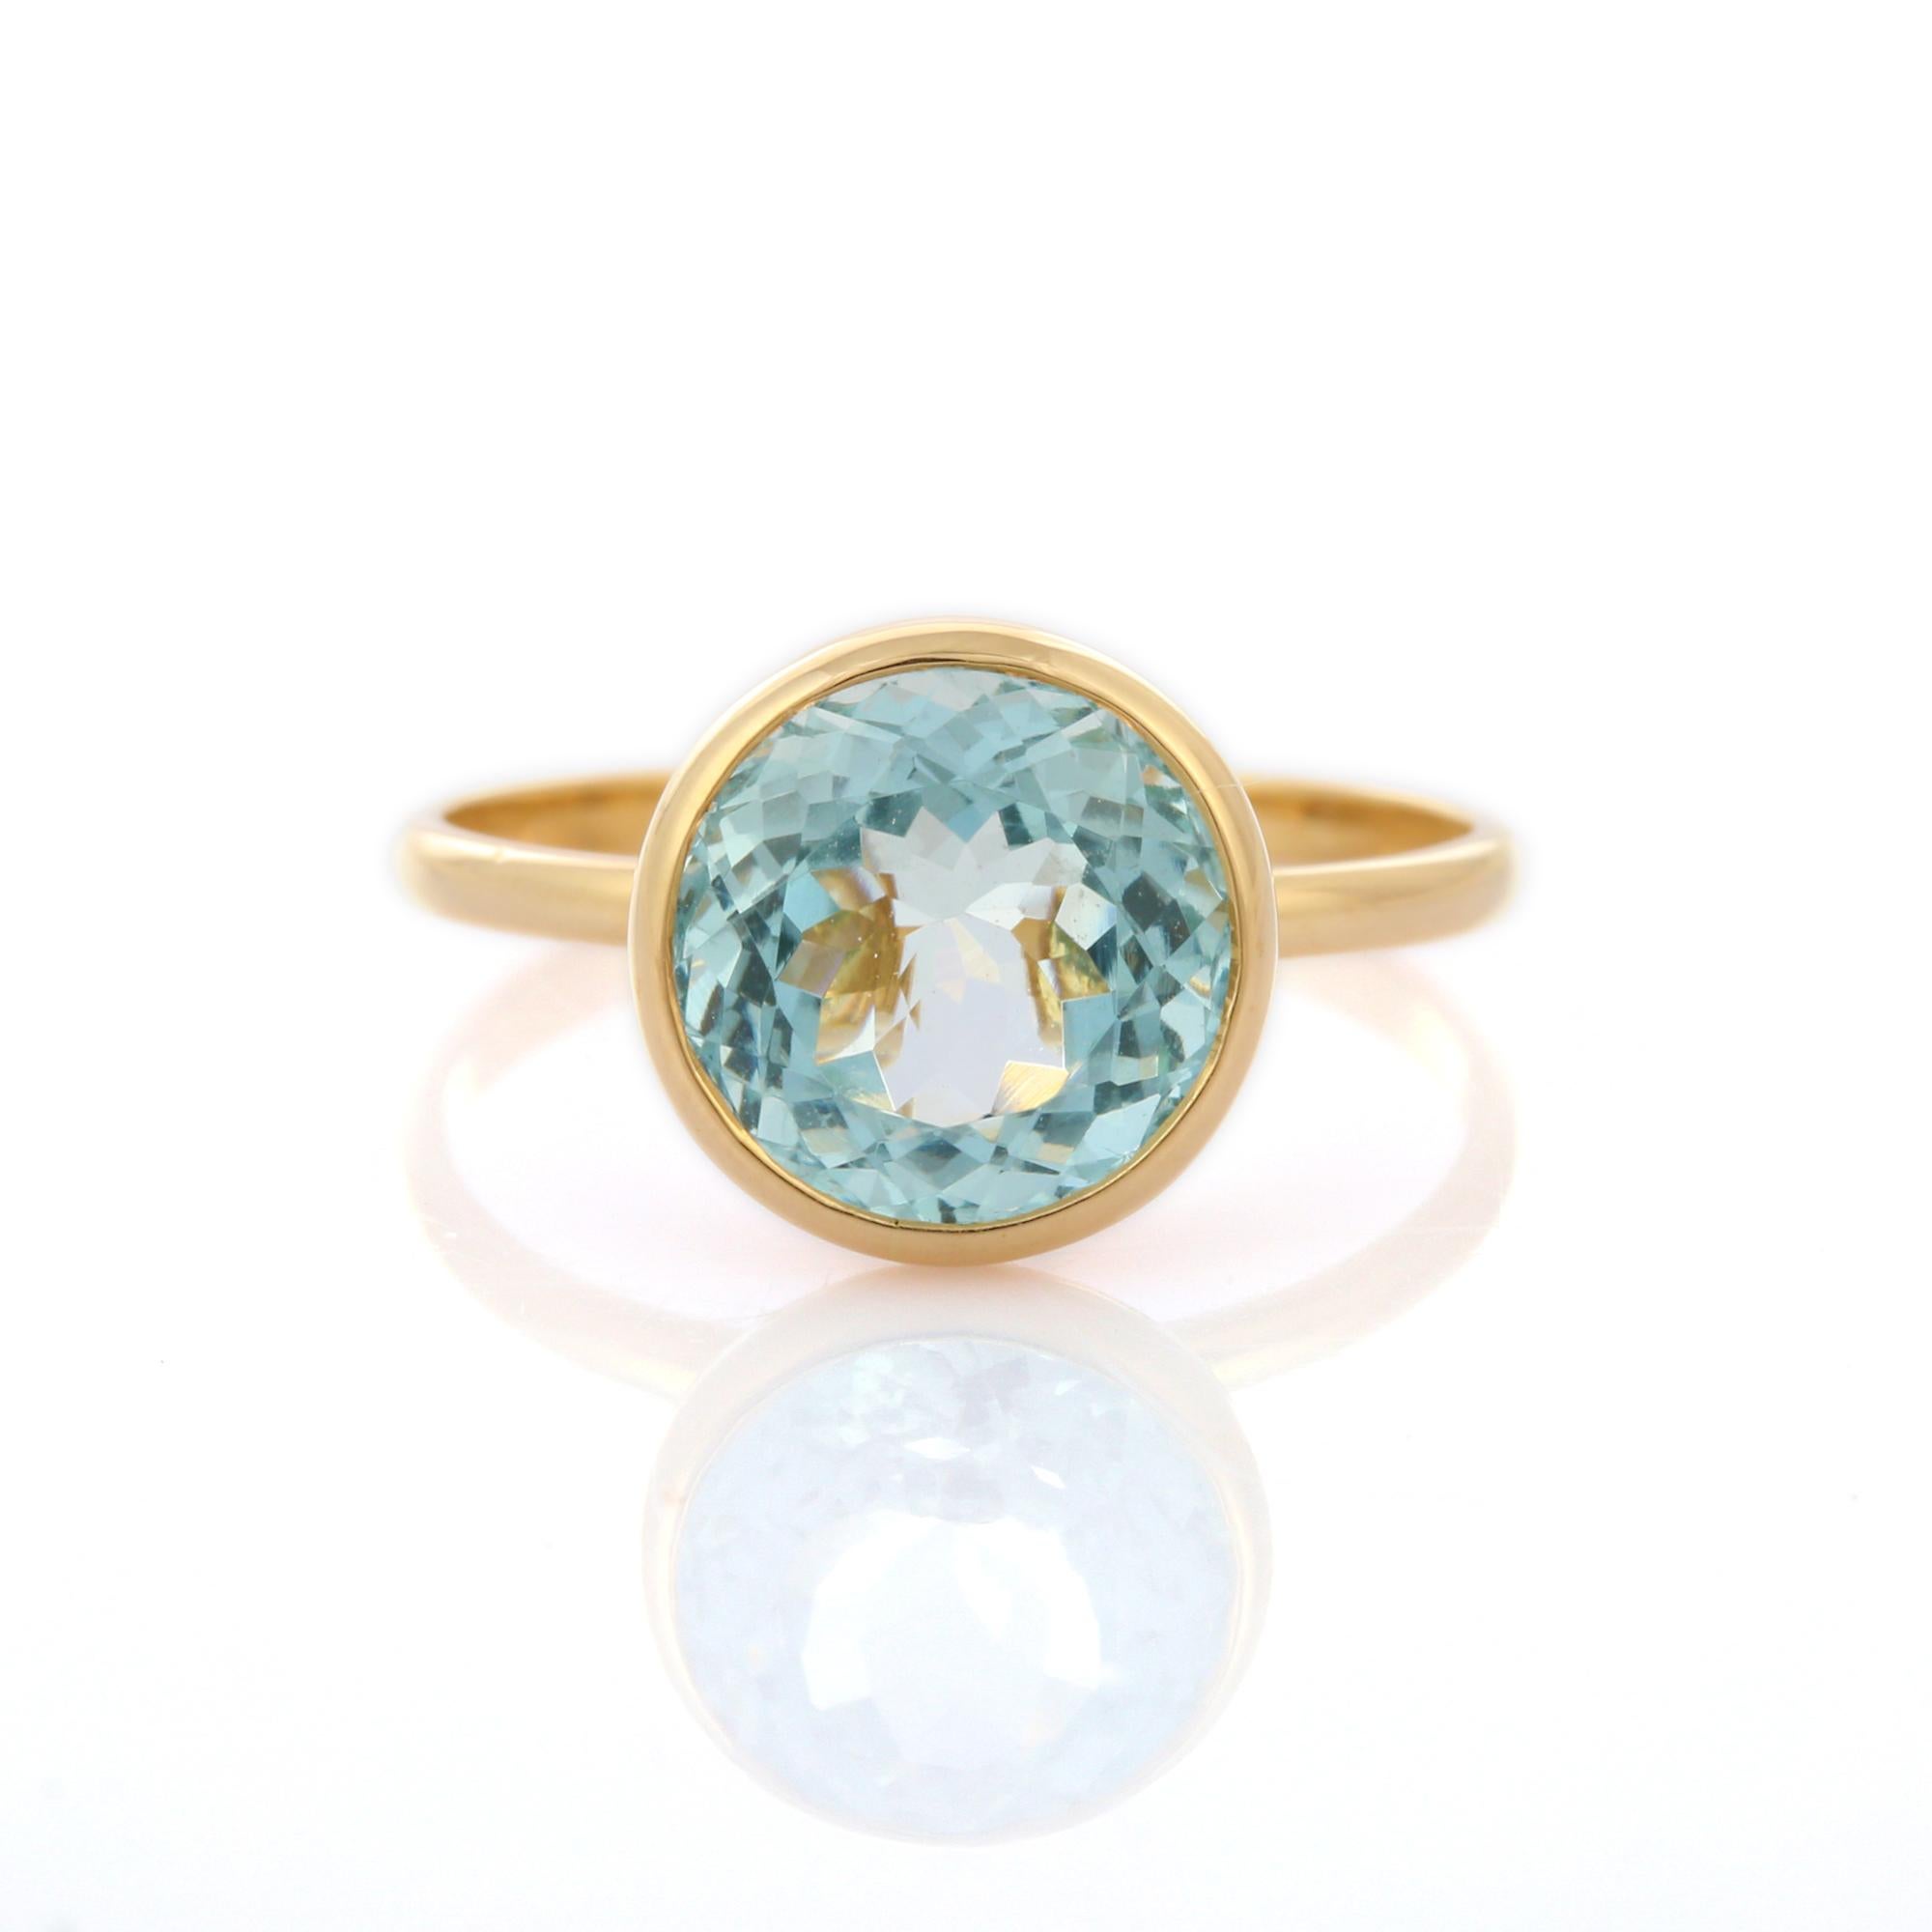 For Sale:  3.28 Carat Aquamarine Round Cut Cocktail Ring in 18K Yellow Gold 9